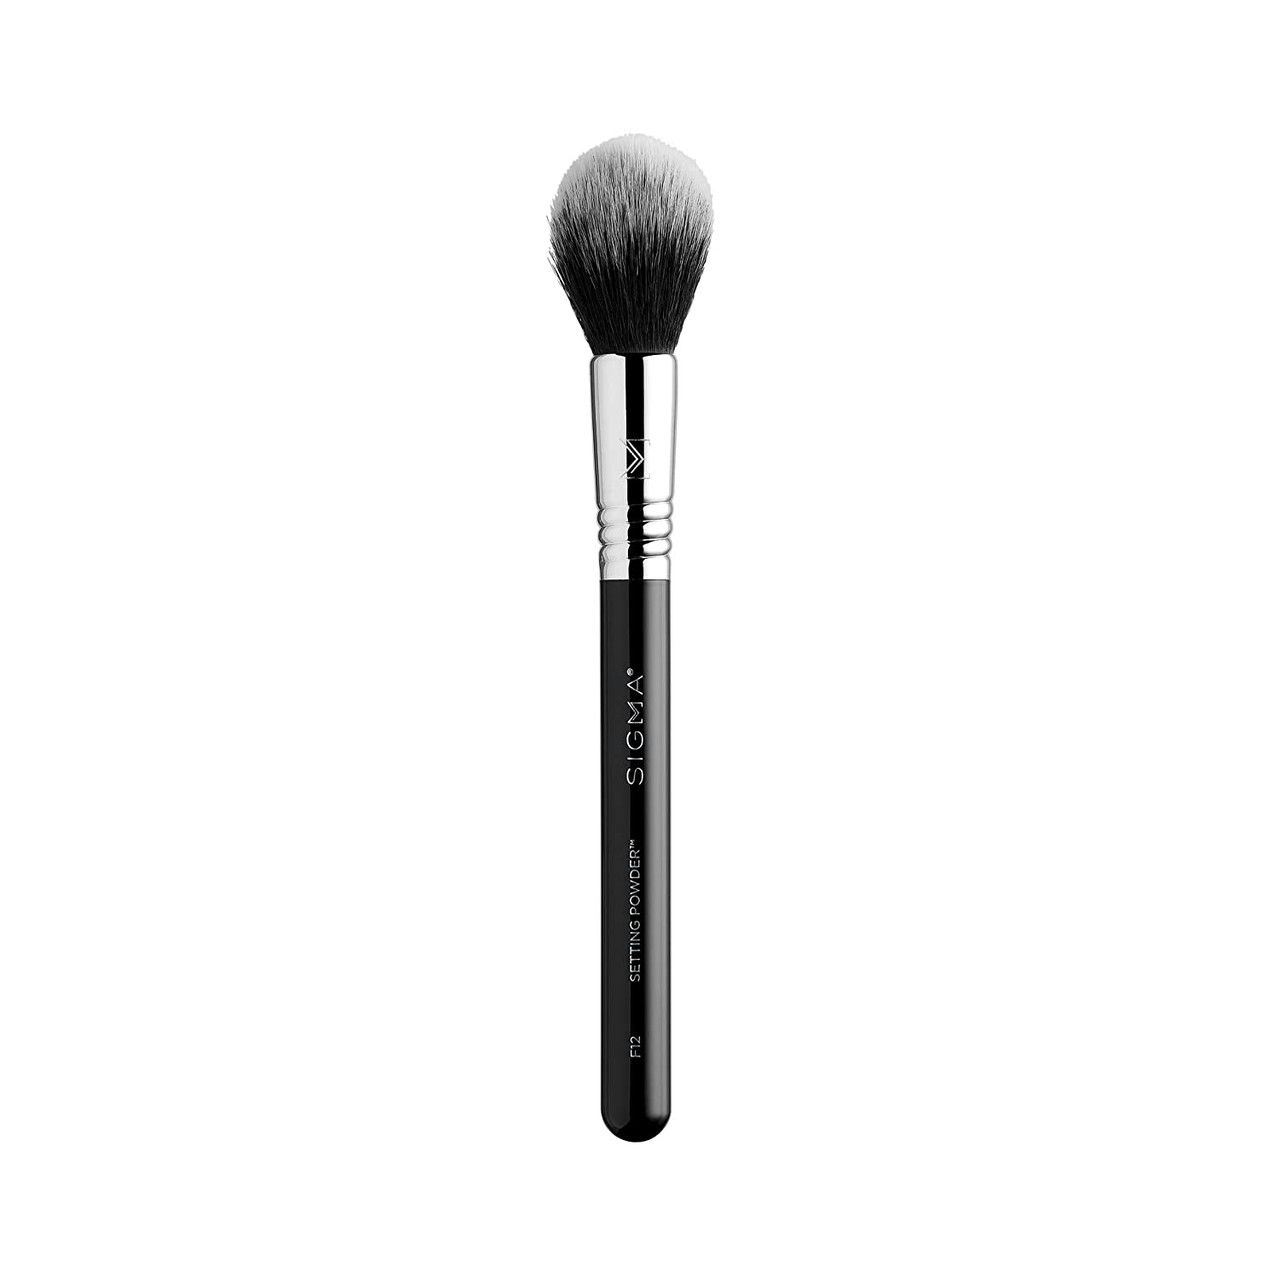  Precision Beauty Foundation Brush : Beauty & Personal Care